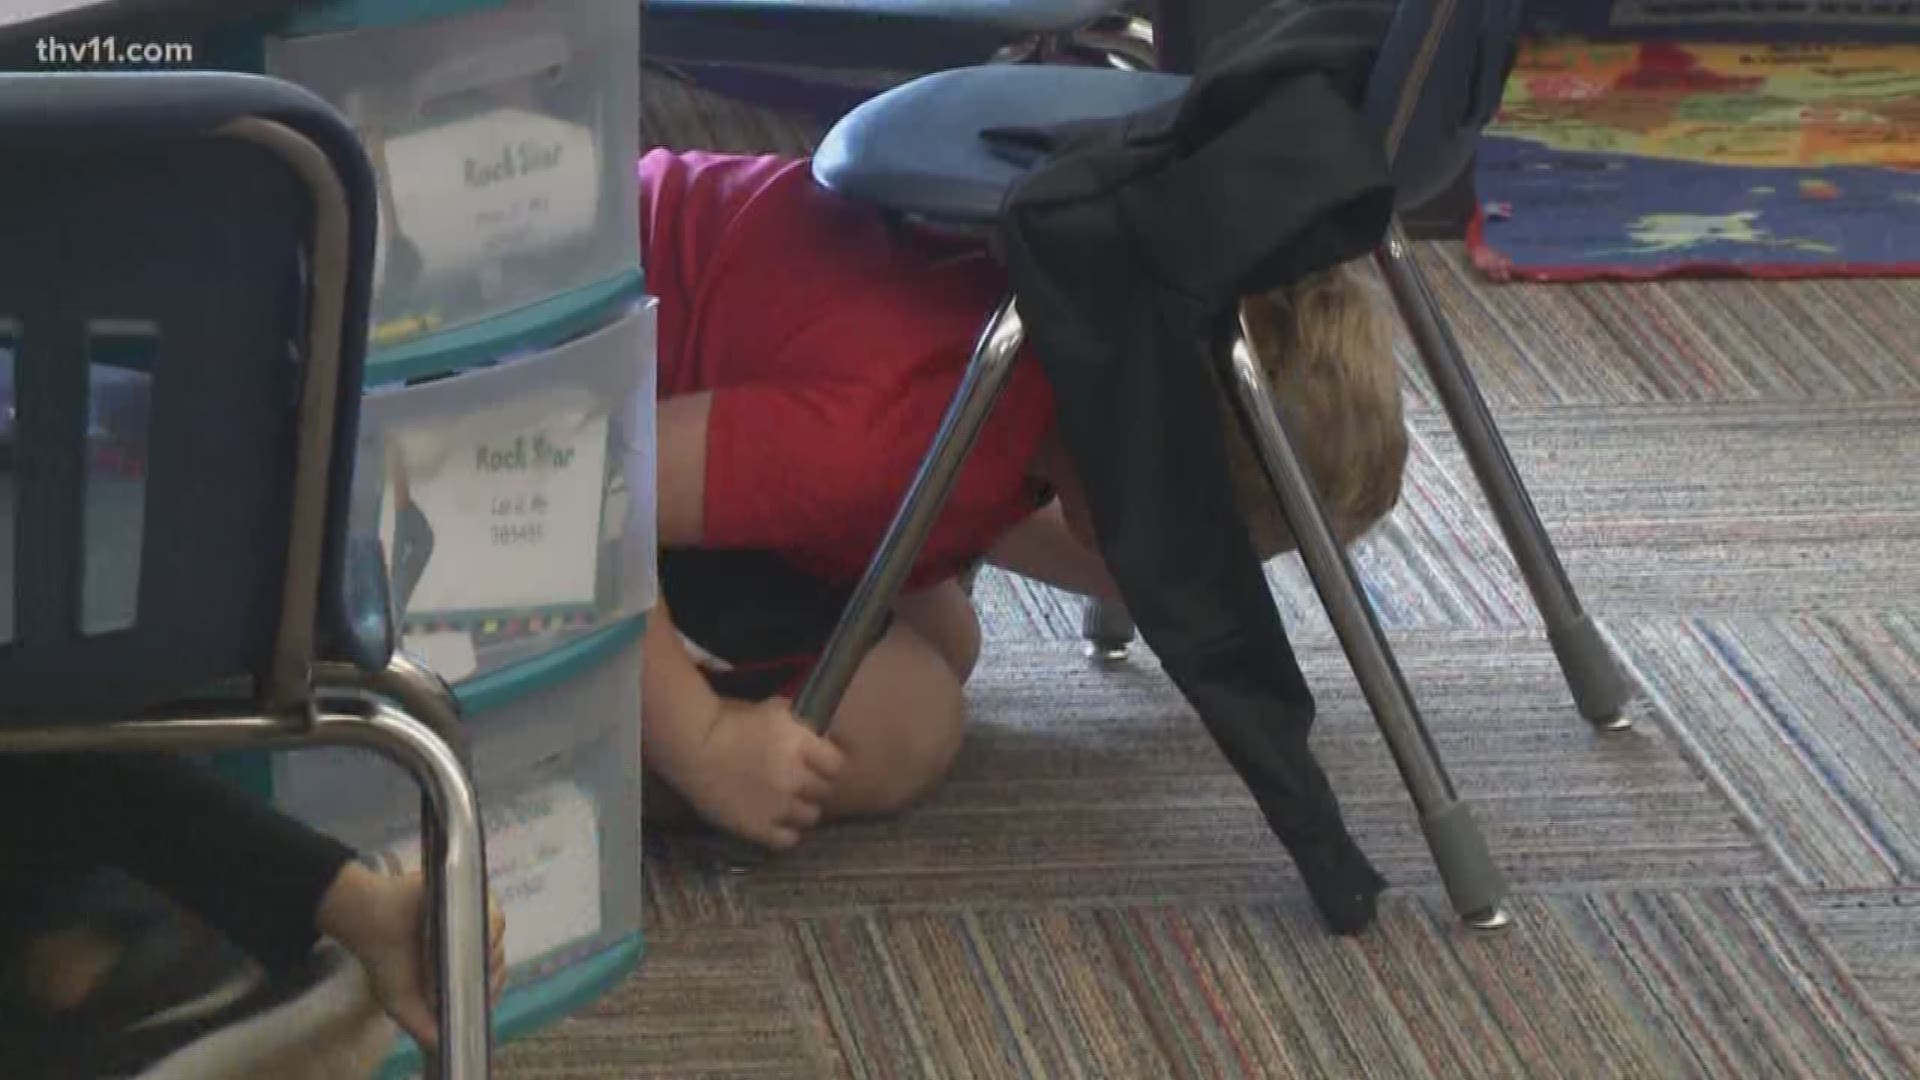 It's not something we deal with often, but some schools in Arkansas participated in an international earthquake drill.